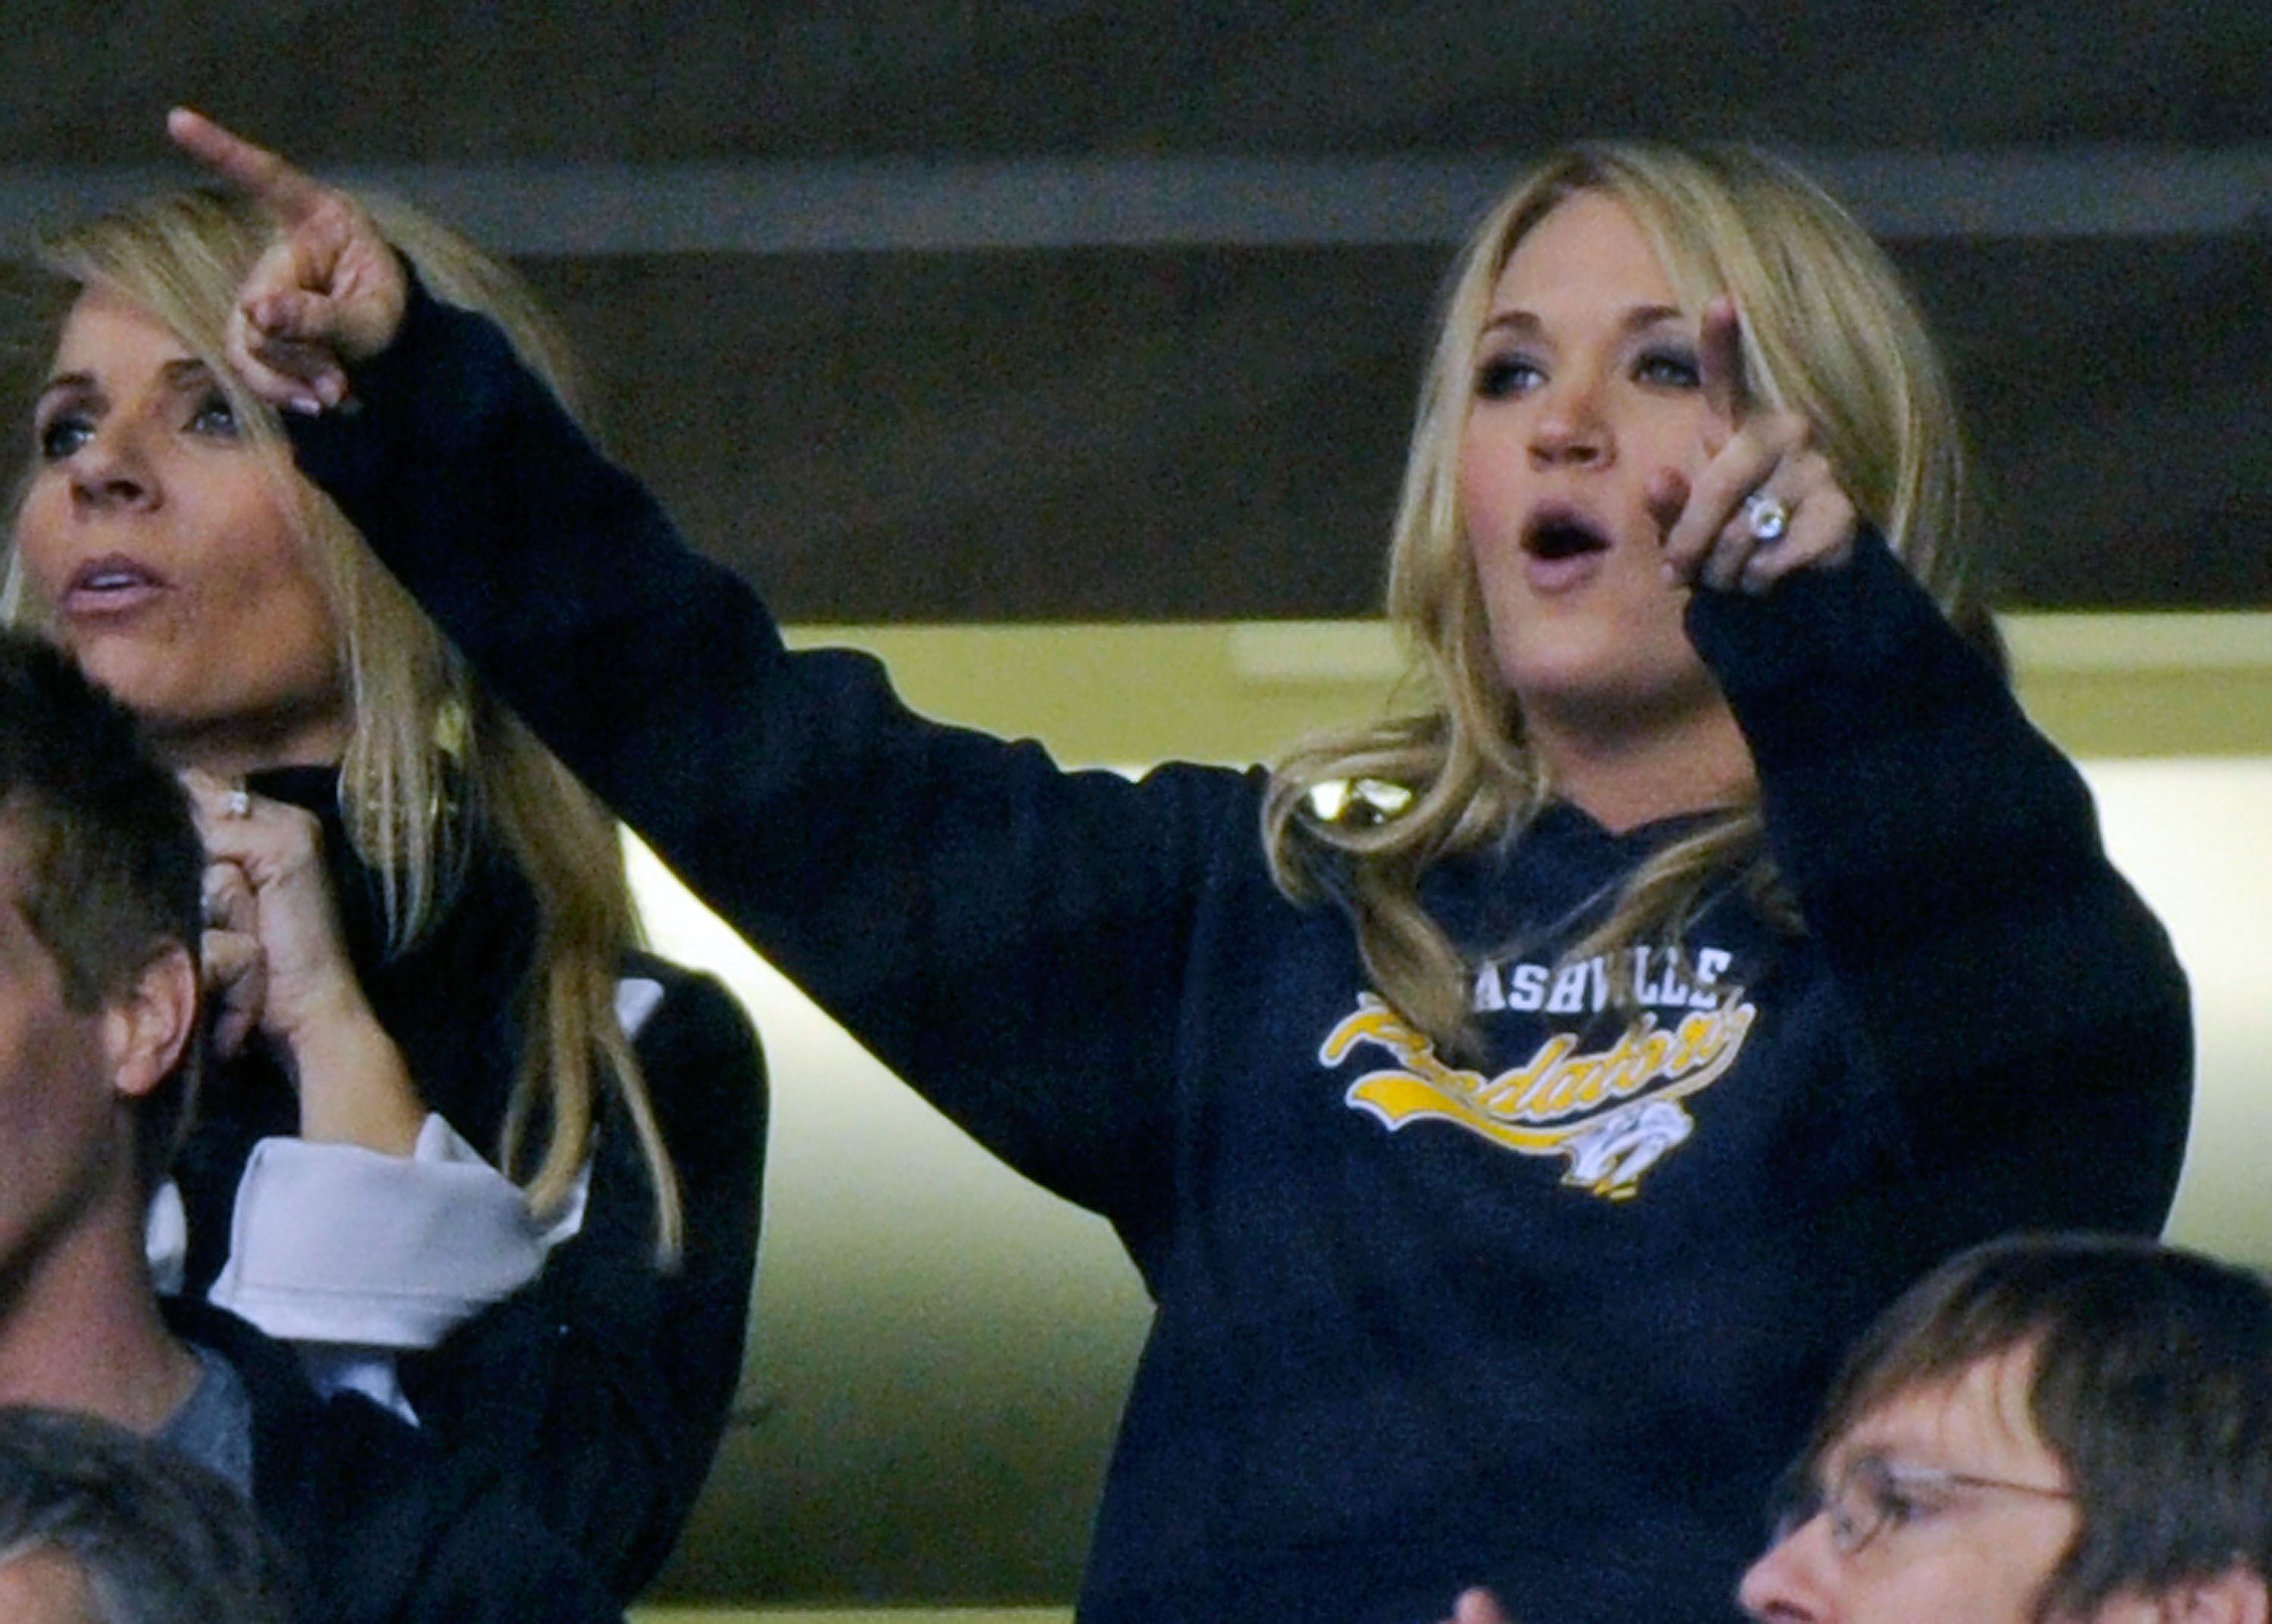 NASHVILLE, TN - FEBRUARY 17:  Country music singer Carrie Underwood celebrates after a goal by the Nashville Predators against the Vancouver Canucks on February 17, 2011 at the Bridgestone Arena in Nashville, Tennessee.  (Photo by Frederick Breedon/Getty